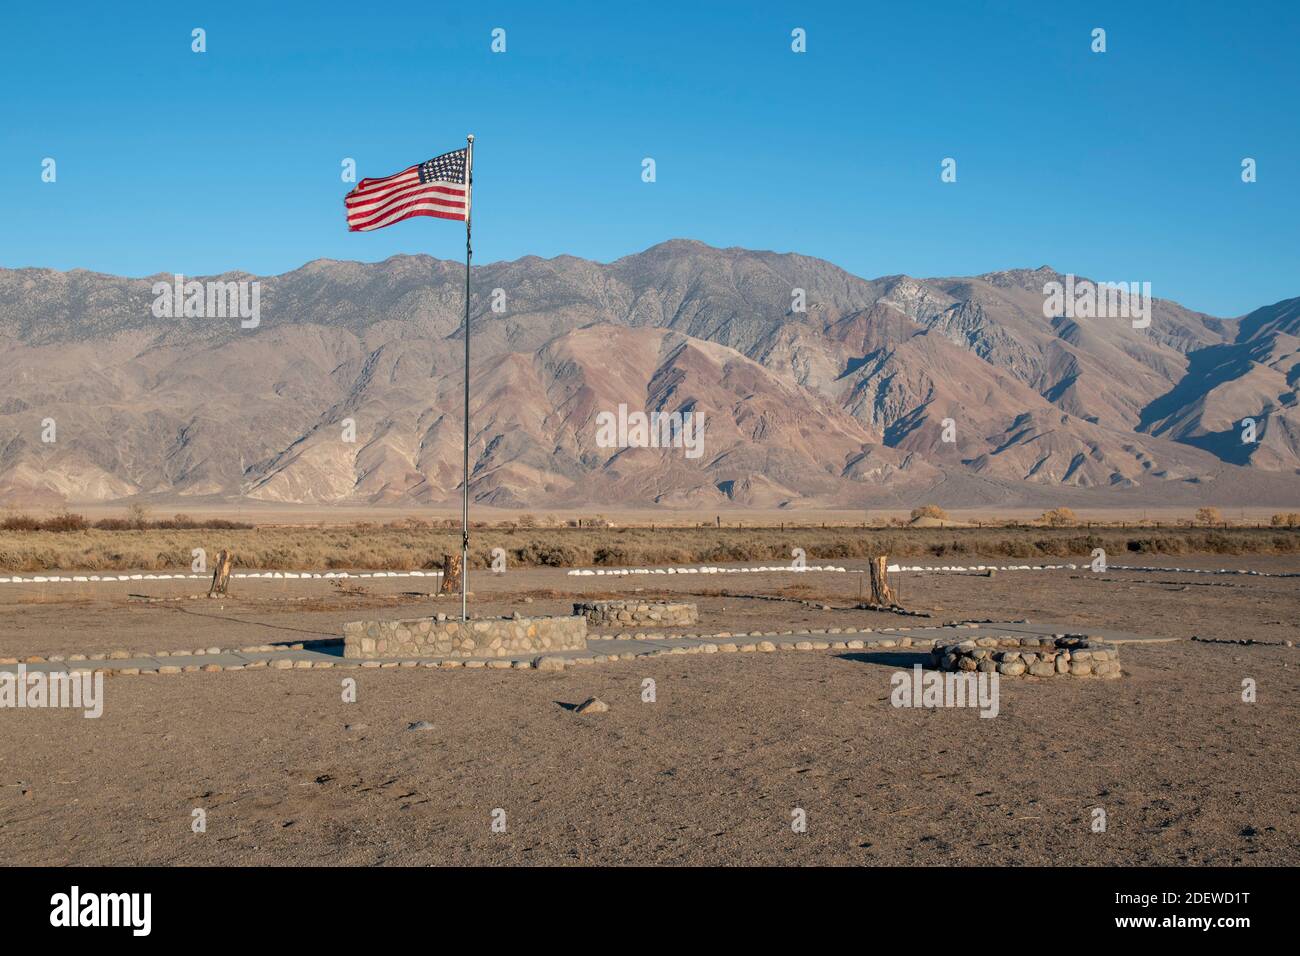 The Manzanar War Relocation Center was an internment camp for Japanese citizens in World War II. It's in the Eastern Sierras of Inyo County, CA. Stock Photo